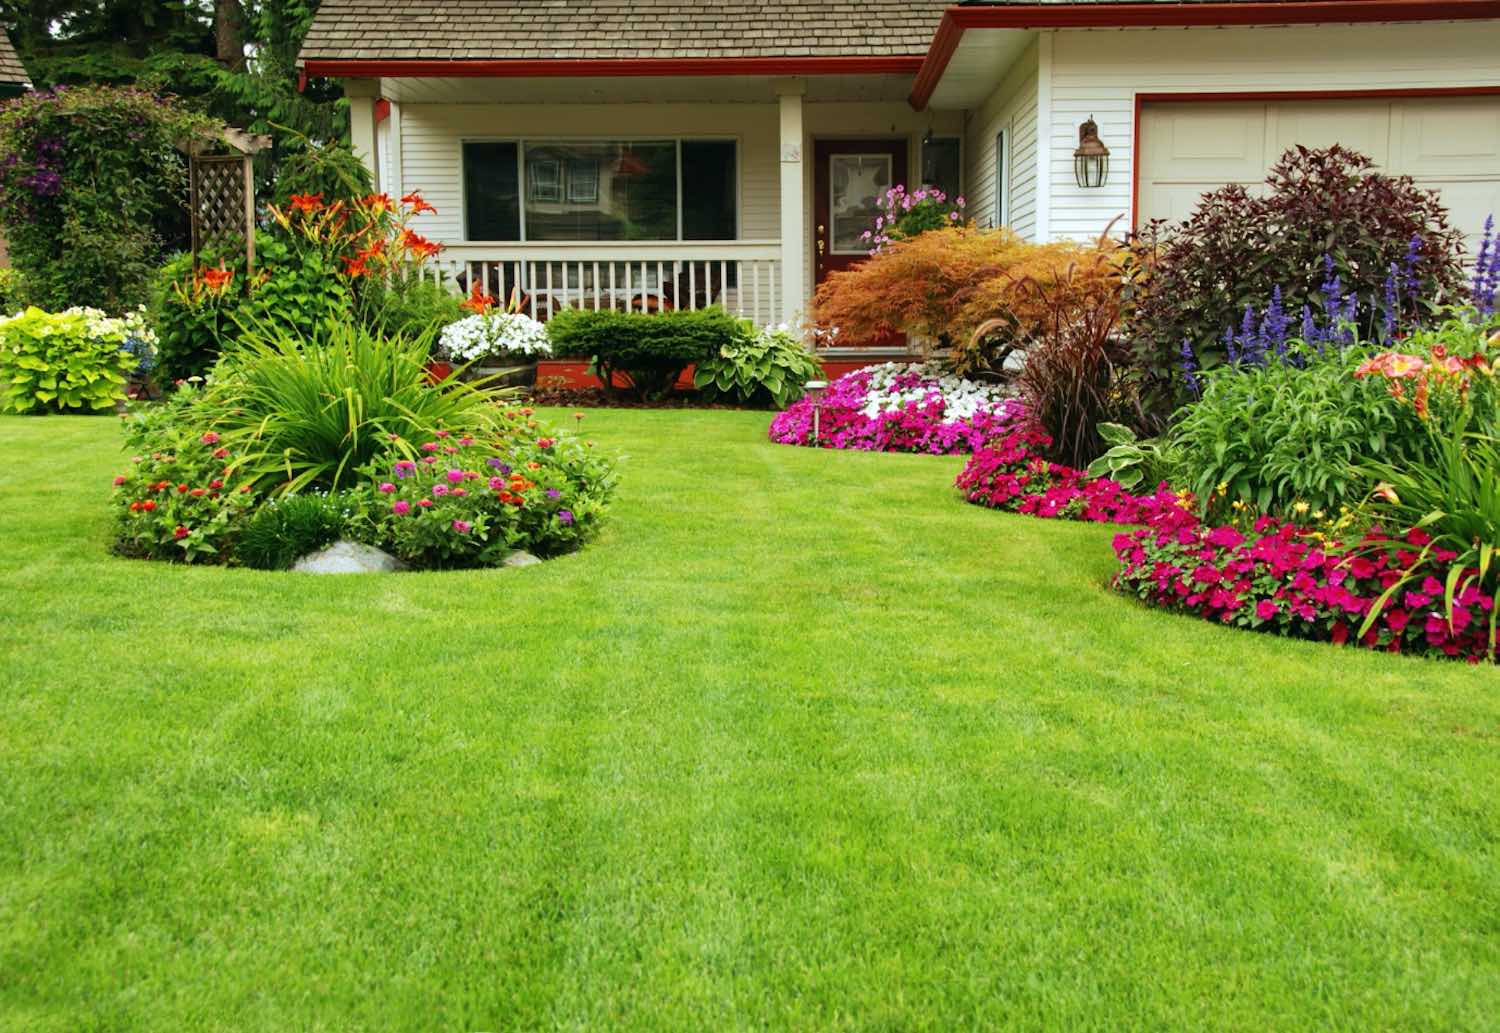 5 Simple Landscaping Tips to Upgrade Your Home's Curb Appeal